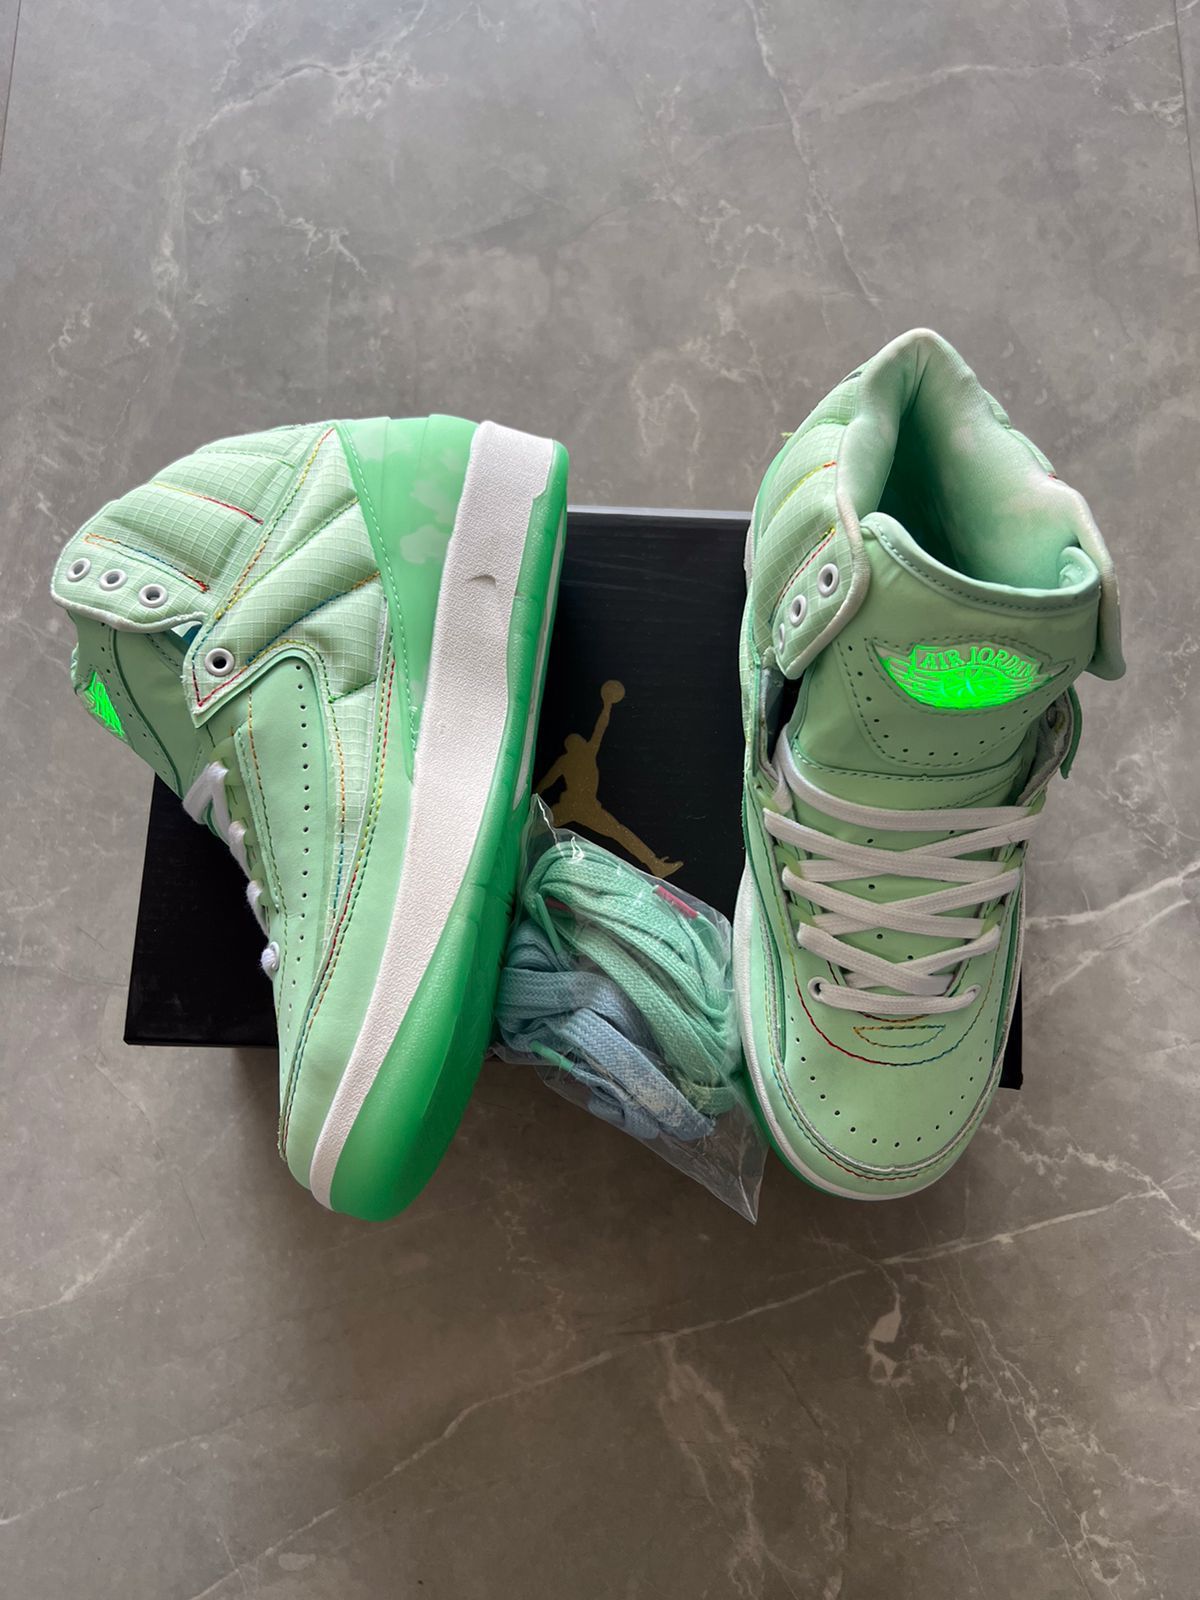 X Air Retro Green Glow Sneakers For Boys